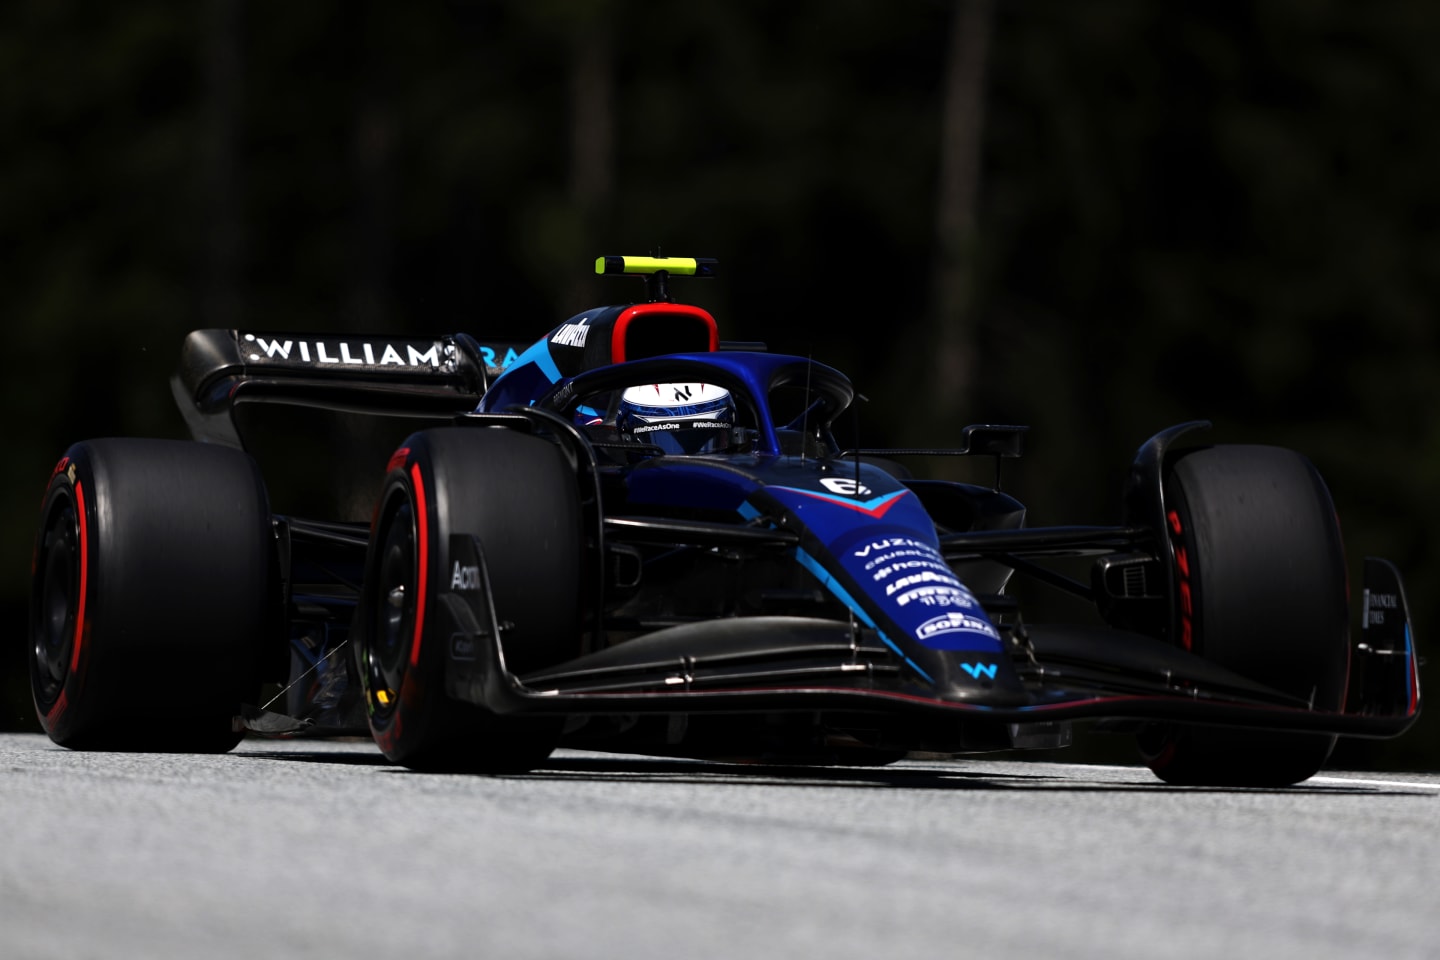 SPIELBERG, AUSTRIA - JULY 08: Nicholas Latifi of Canada driving the (6) Williams FW44 Mercedes on track during practice ahead of the F1 Grand Prix of Austria at Red Bull Ring on July 08, 2022 in Spielberg, Austria. (Photo by Bryn Lennon/Getty Images)